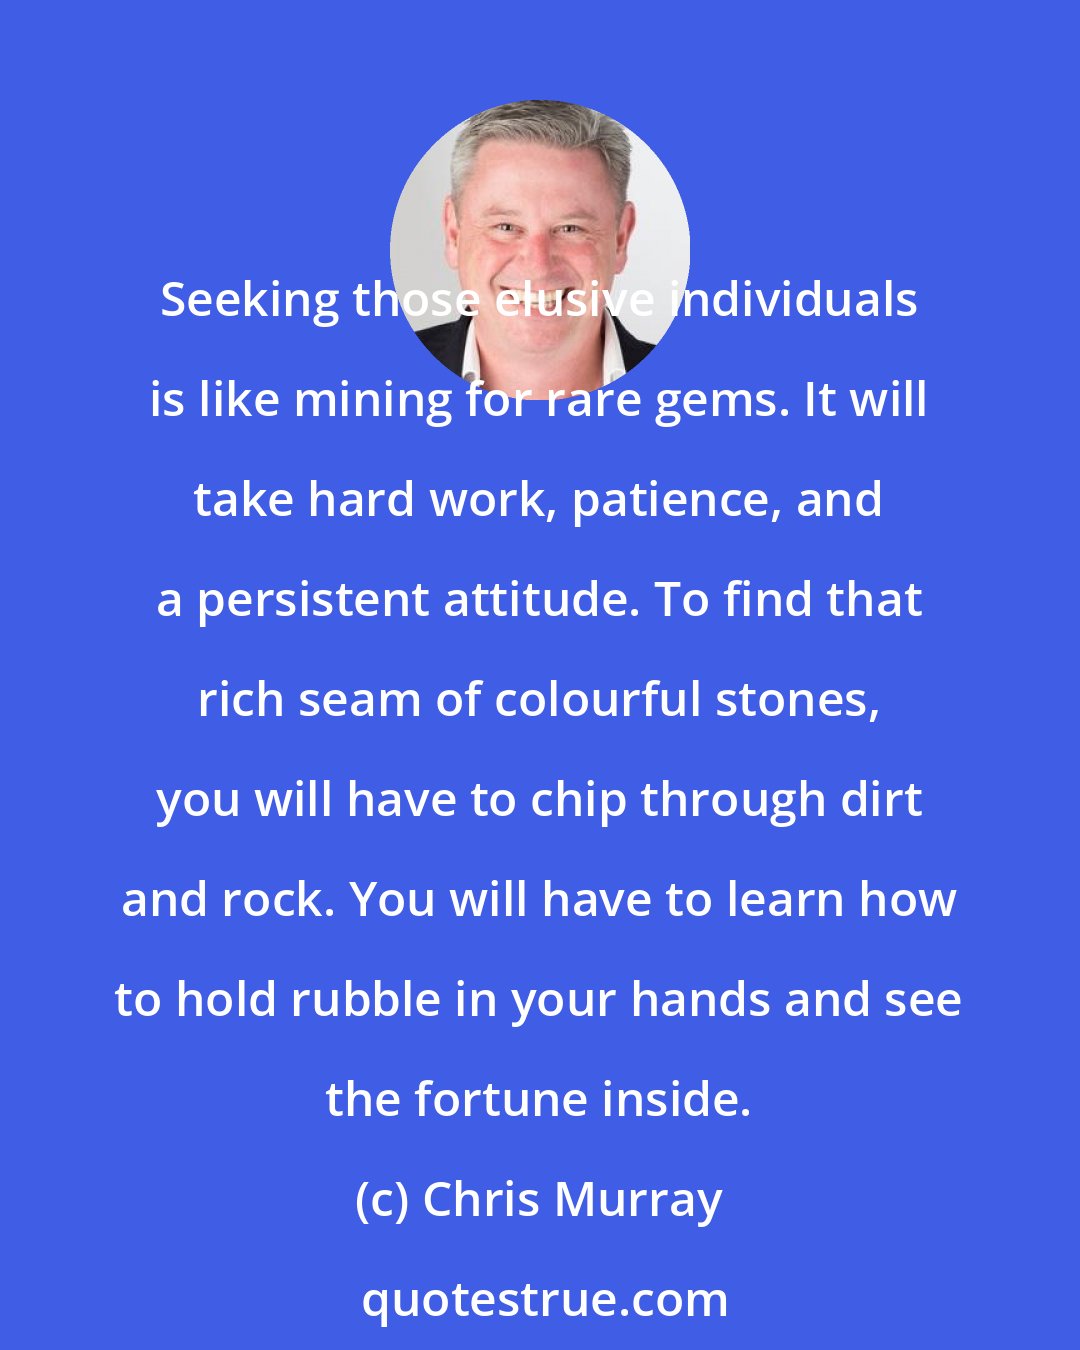 Chris Murray: Seeking those elusive individuals is like mining for rare gems. It will take hard work, patience, and a persistent attitude. To find that rich seam of colourful stones, you will have to chip through dirt and rock. You will have to learn how to hold rubble in your hands and see the fortune inside.